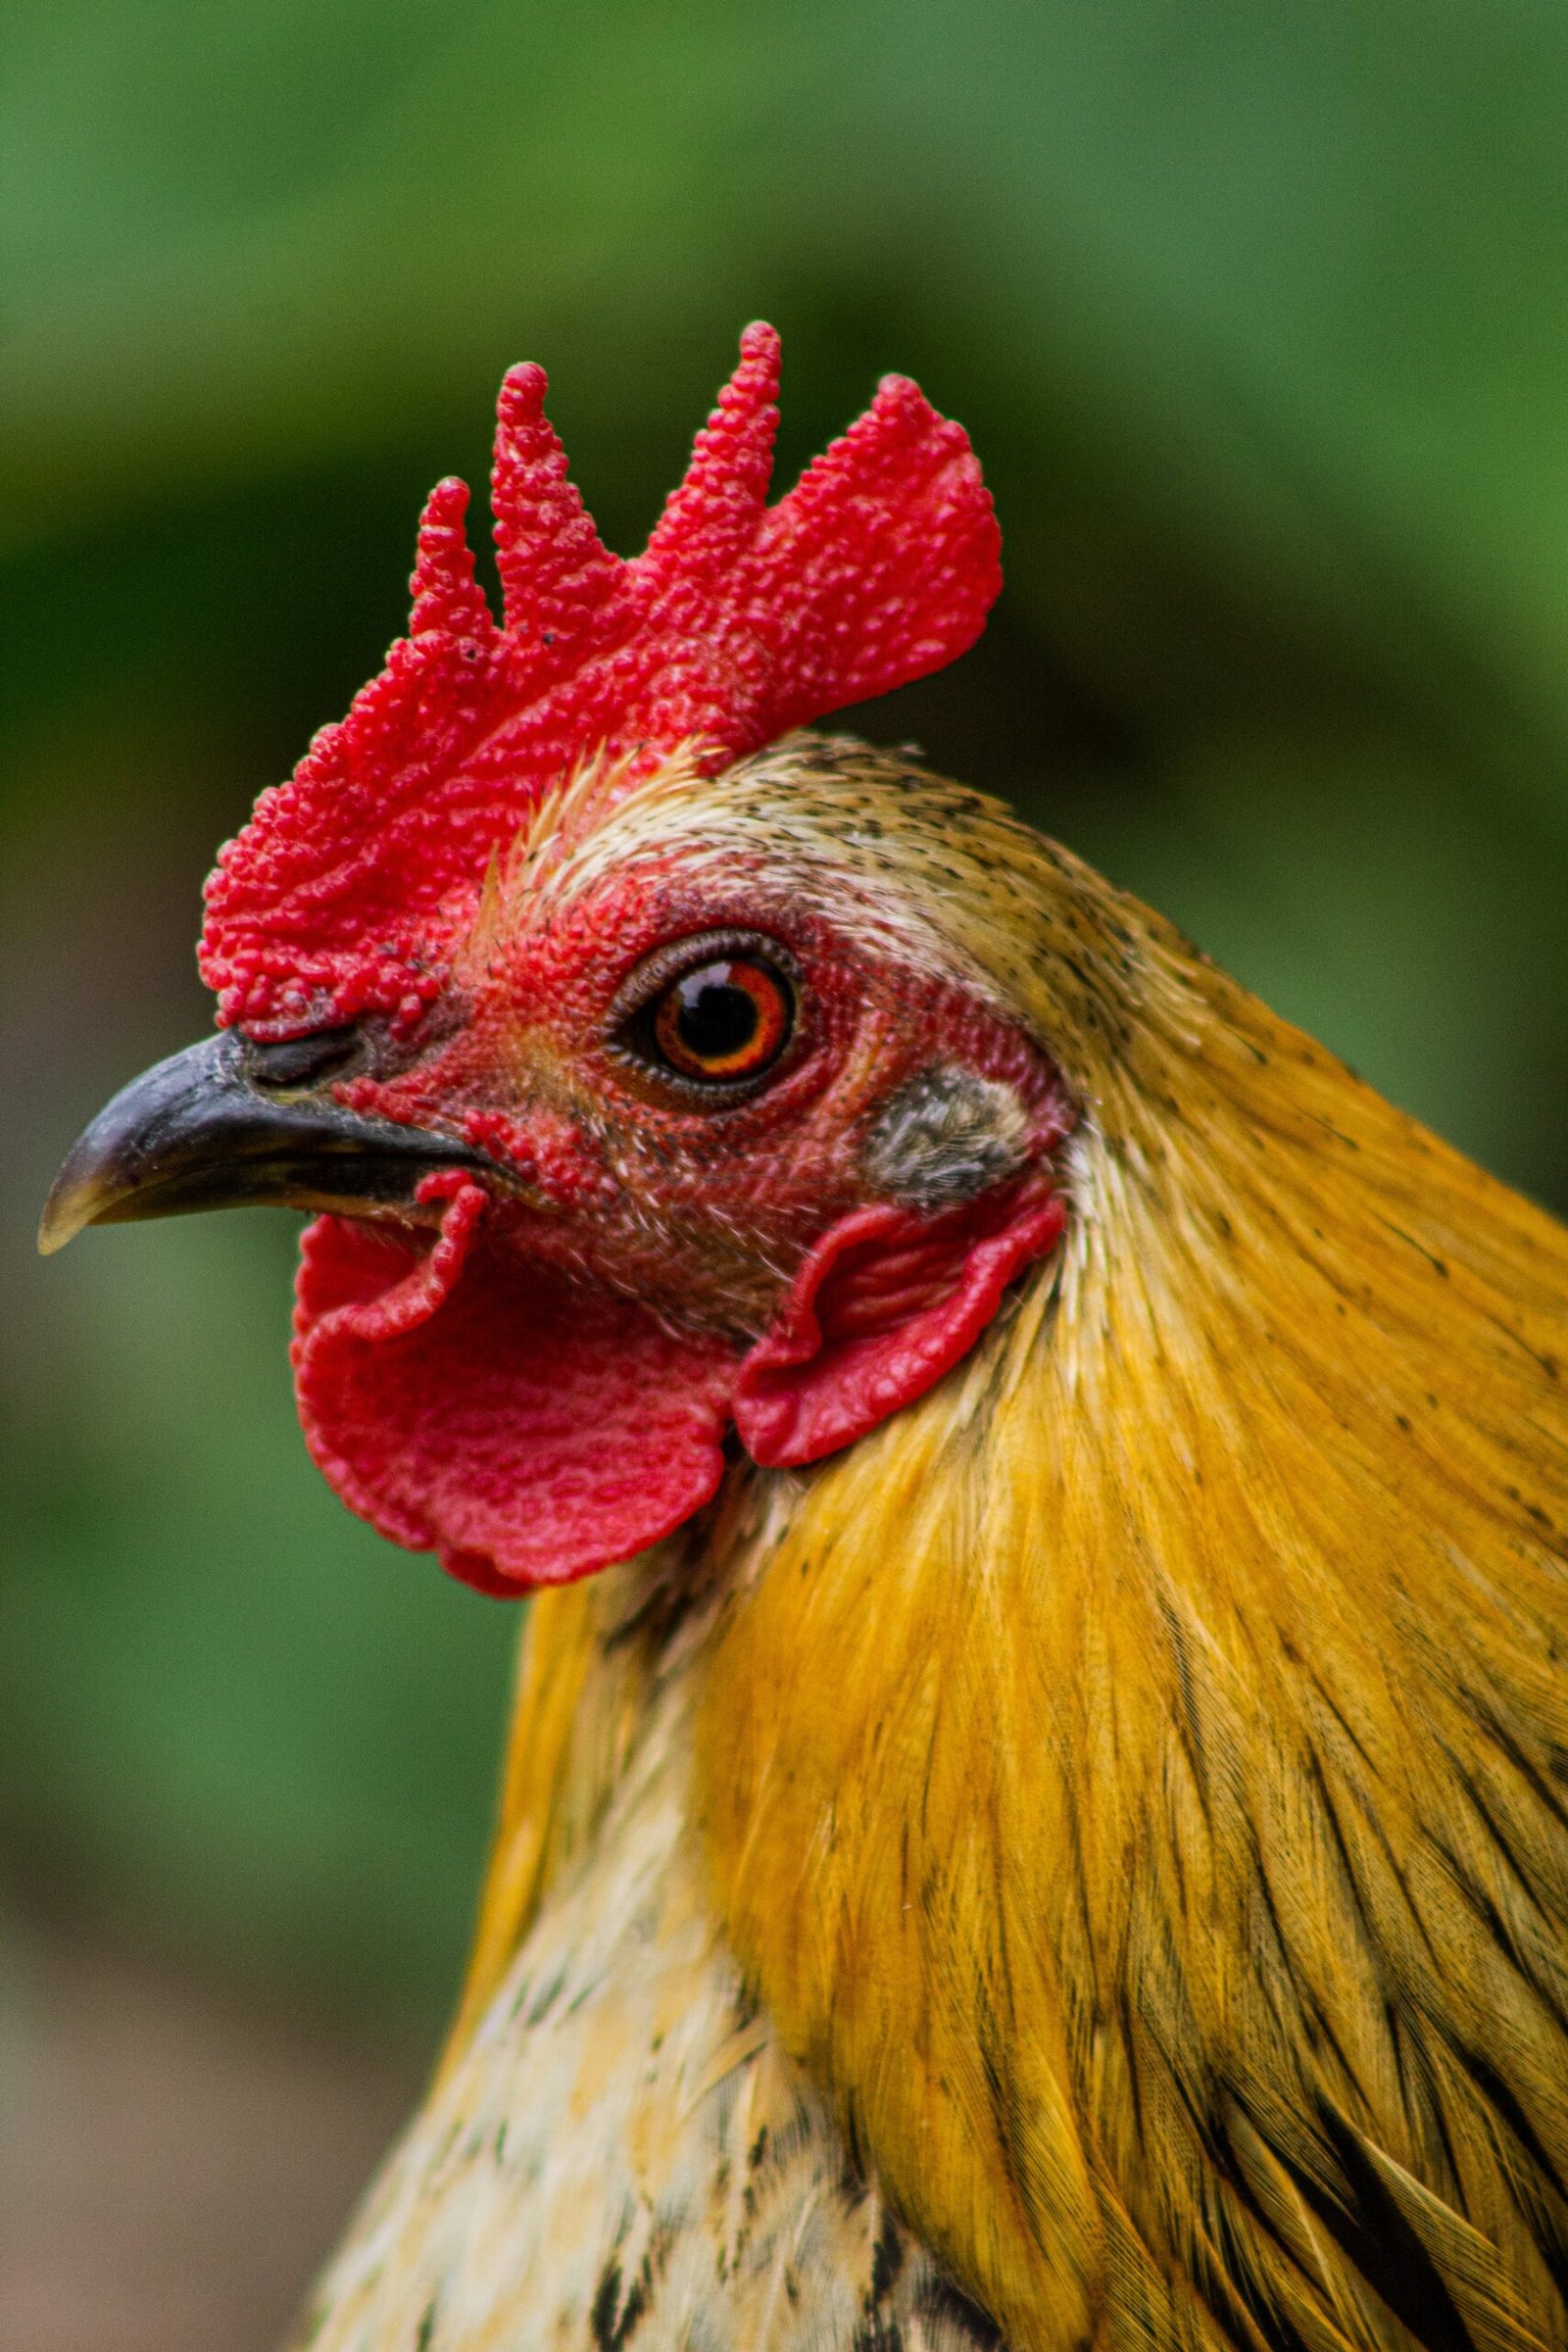 Whats The Impact Of Altitude And High Elevations On Chicken Health?